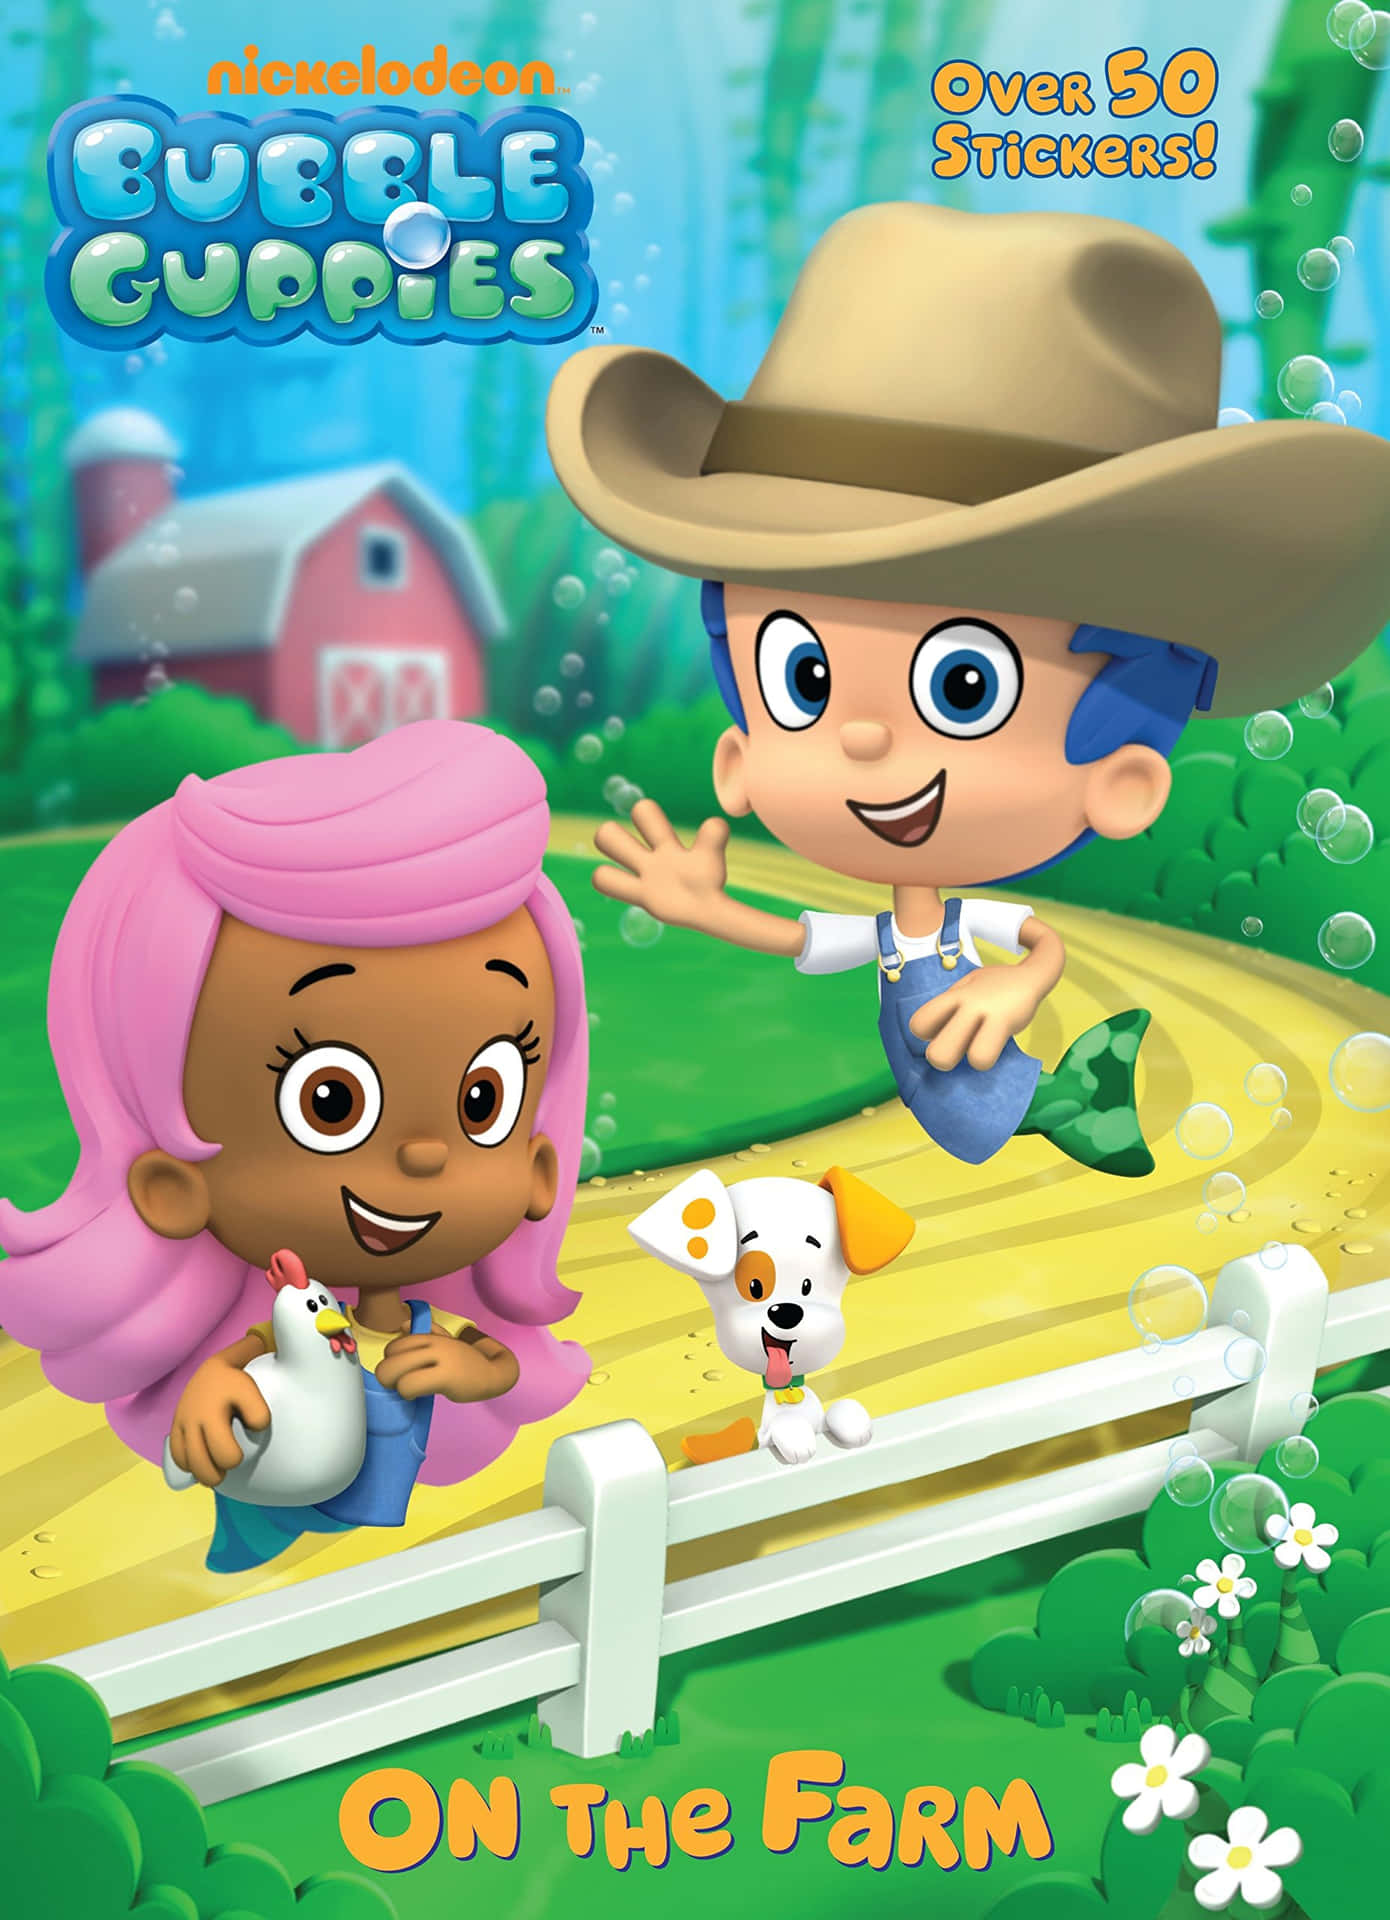 Explore the magical world of Bubble Guppies!